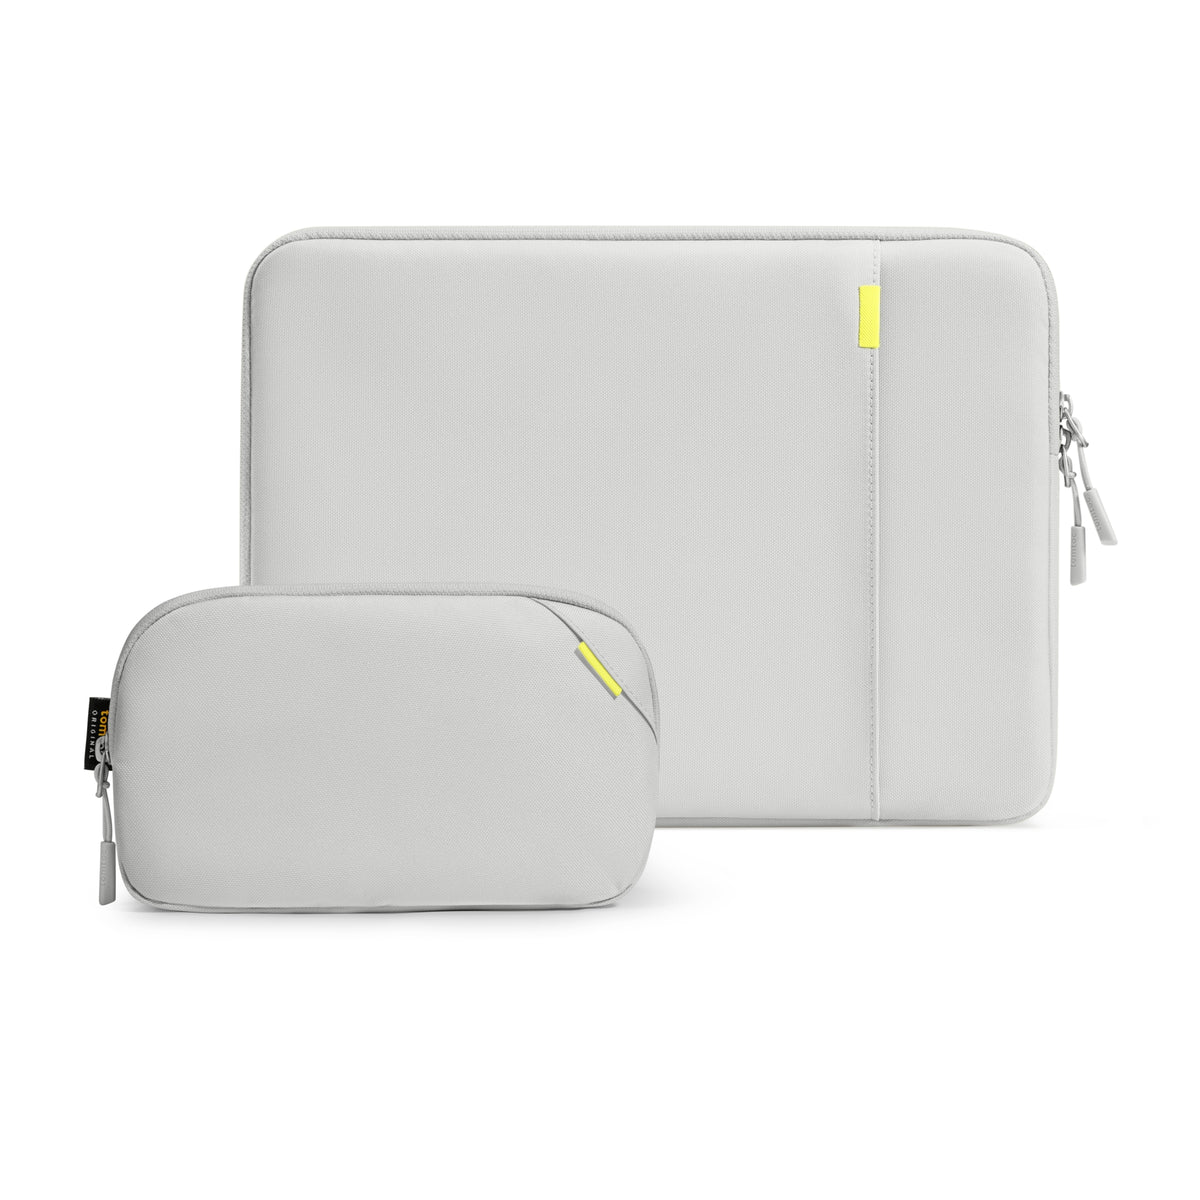 primary_Defender-A13 Laptop Sleeve Kit For 14